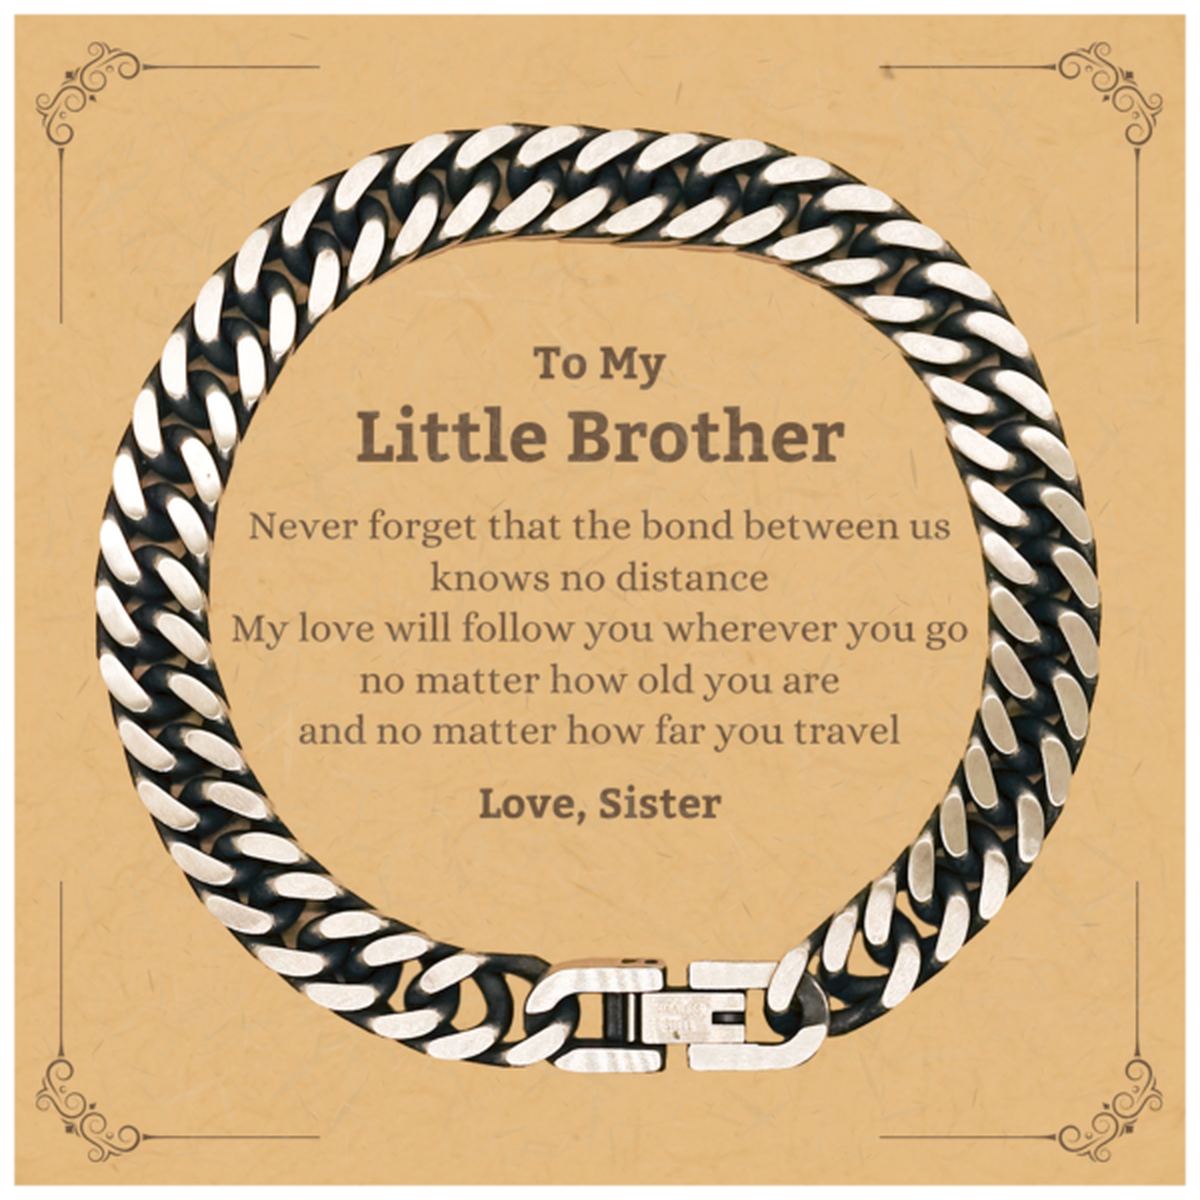 Little Brother Birthday Gifts from Sister, Adjustable Cuban Link Chain Bracelet for Little Brother Christmas Graduation Unique Gifts Little Brother Never forget that the bond between us knows no distance. Love, Sister